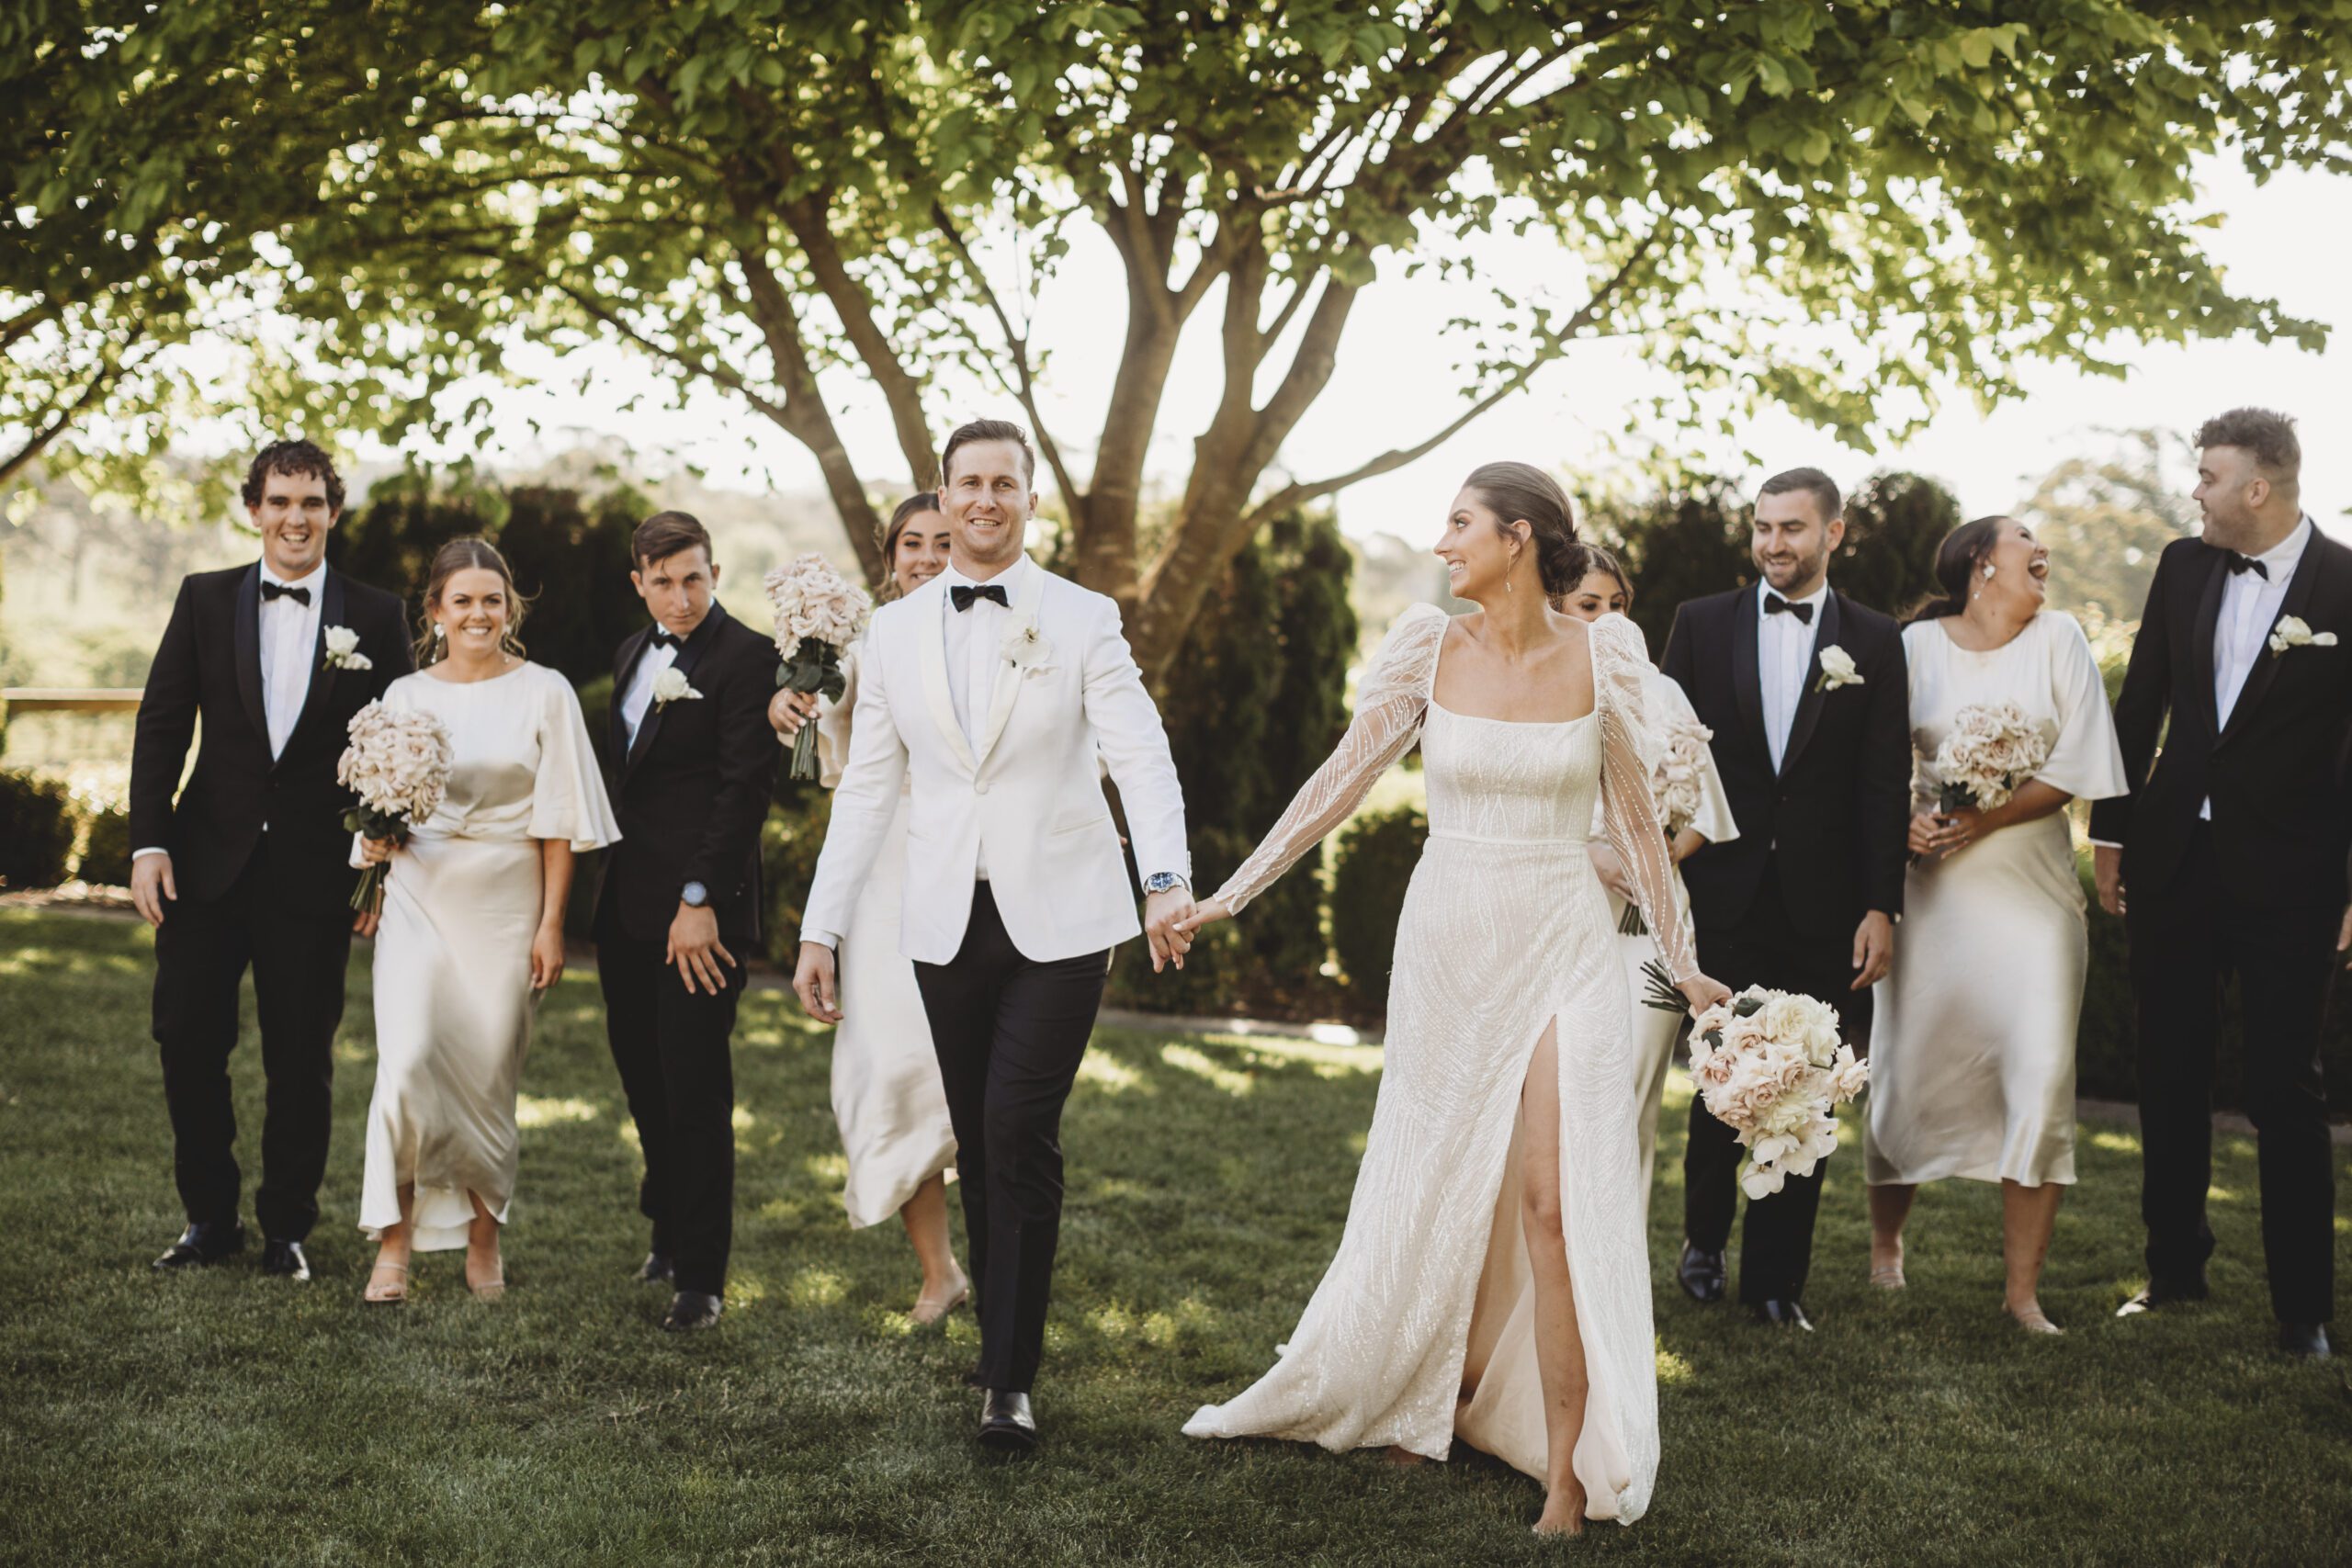 6 Steps to Planning the Perfect Wedding Day